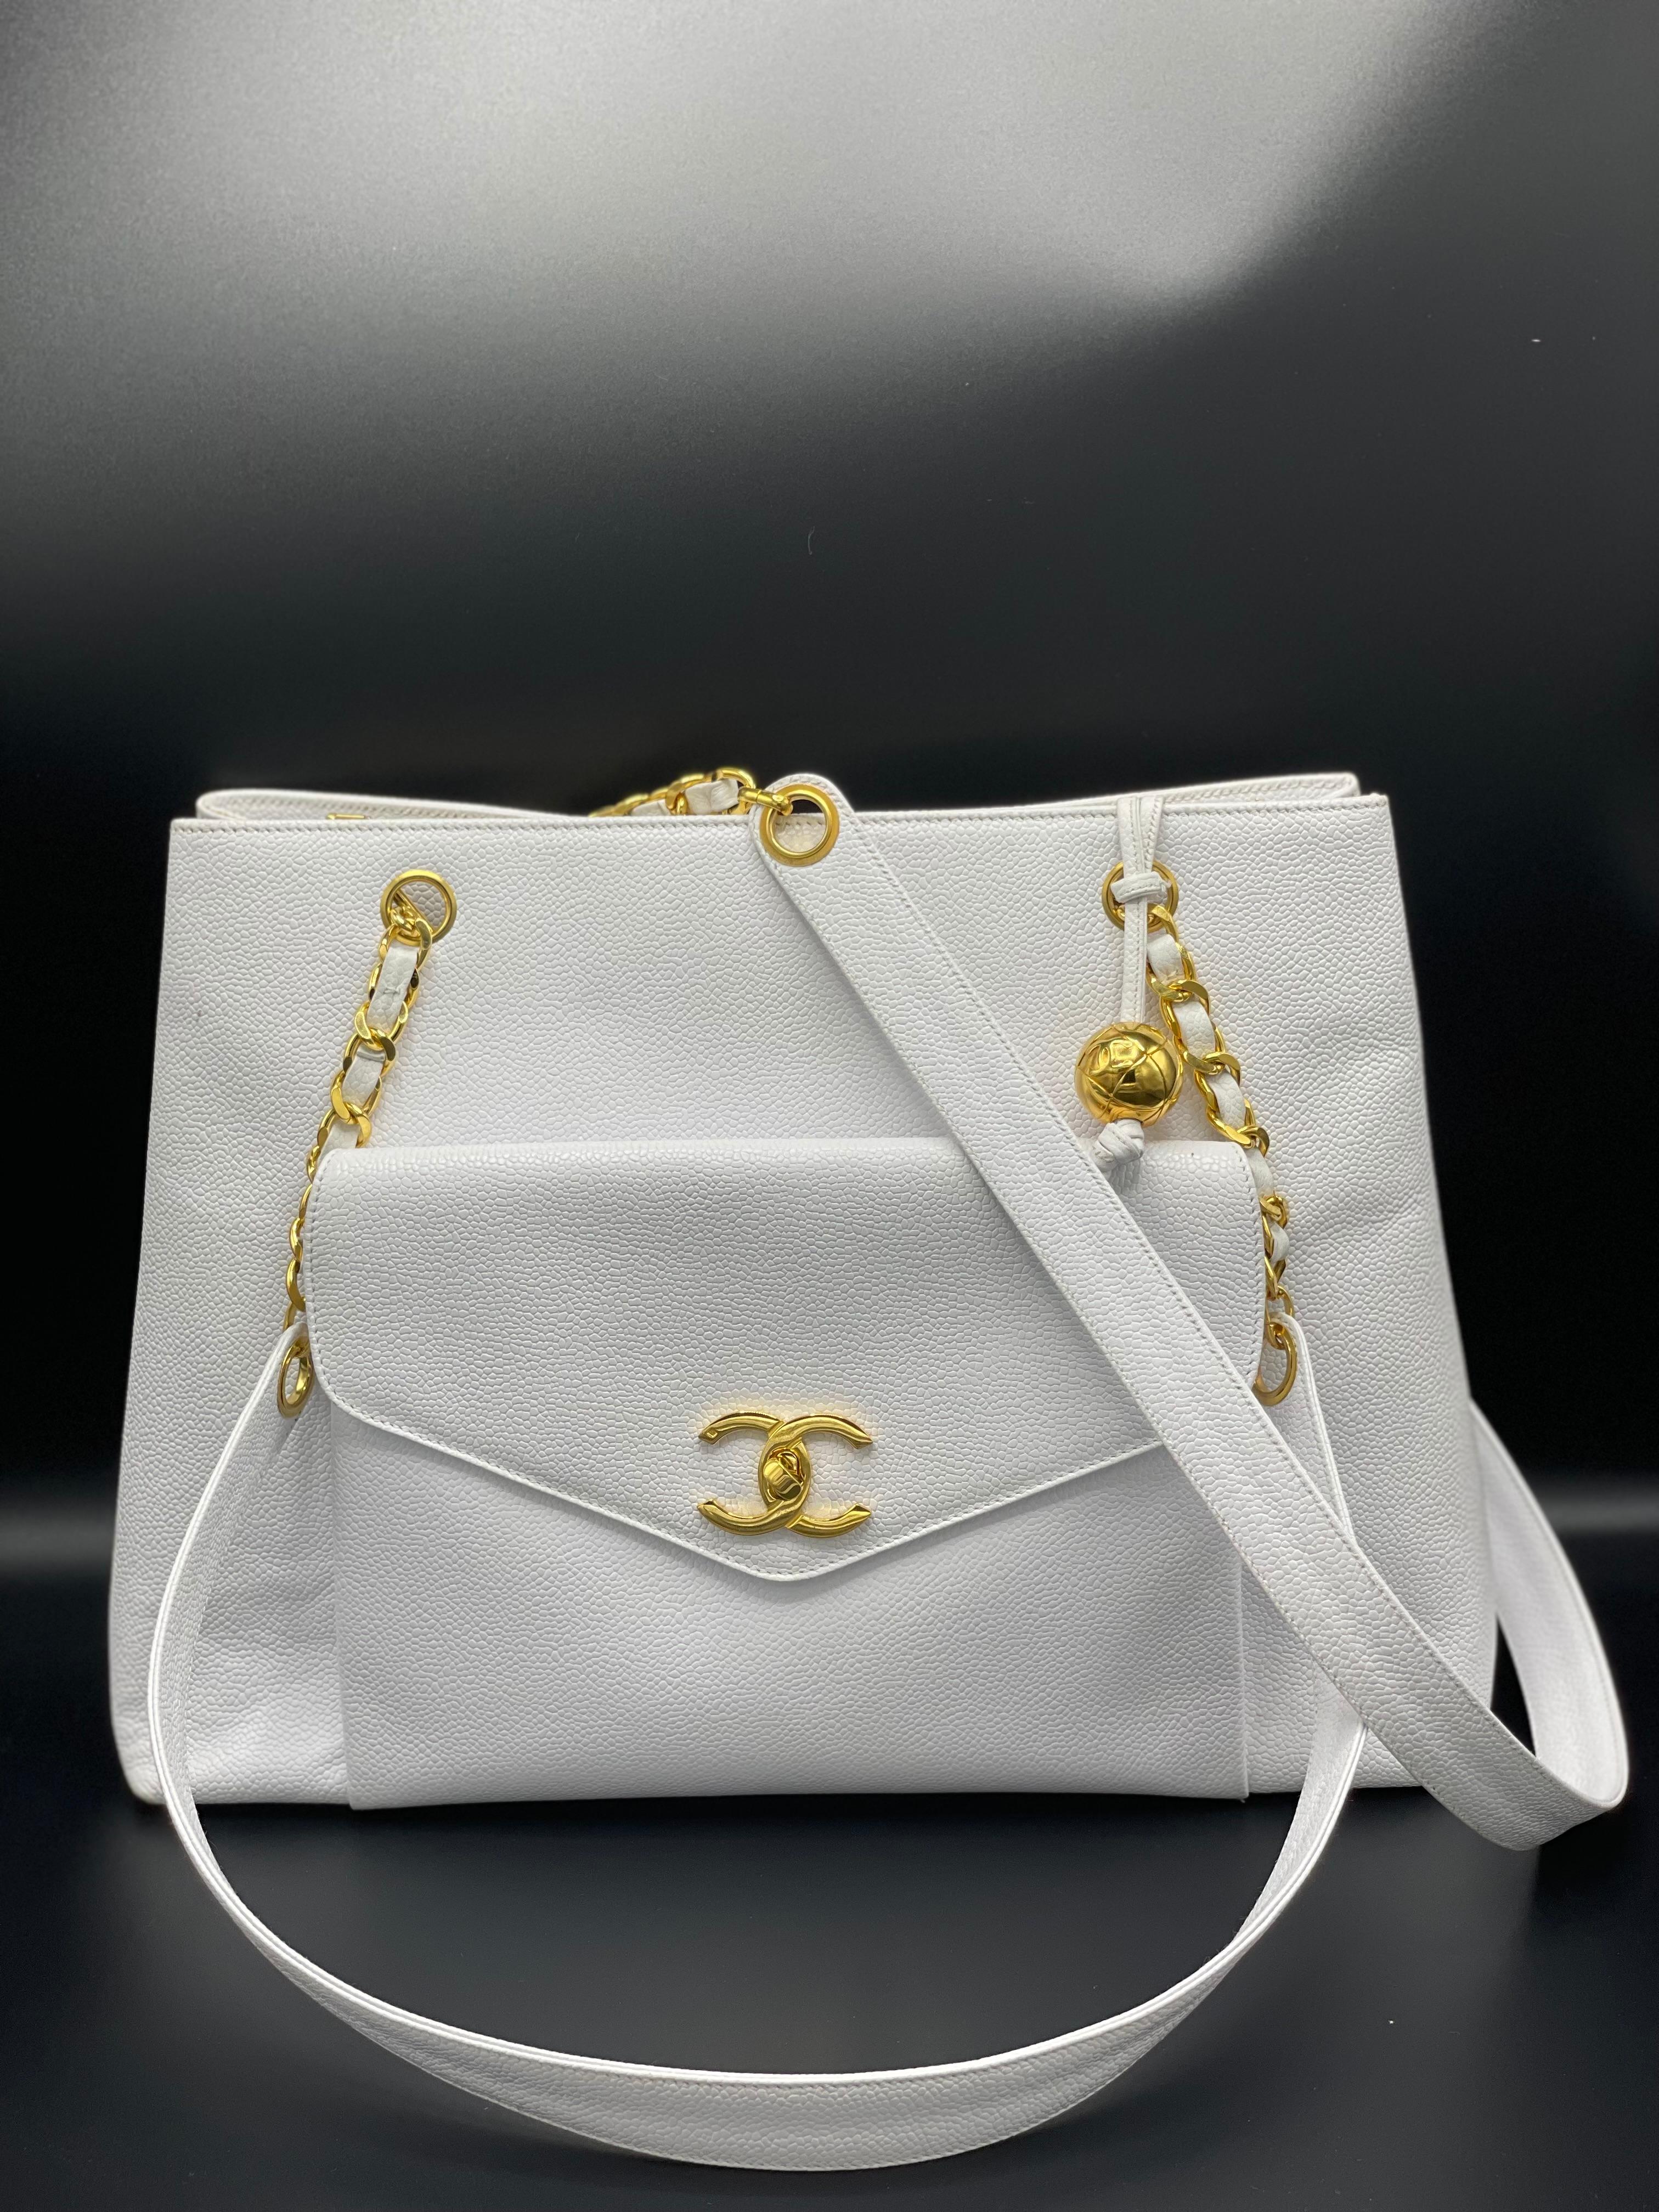 The inside is lined with leather and contains two pockets, each with a CC disk logo zip tag, two open compartments on each side, and a flat bottom for freestanding. Chanel Chain Tote bag with white caviar leather, large front exterior pocket with a